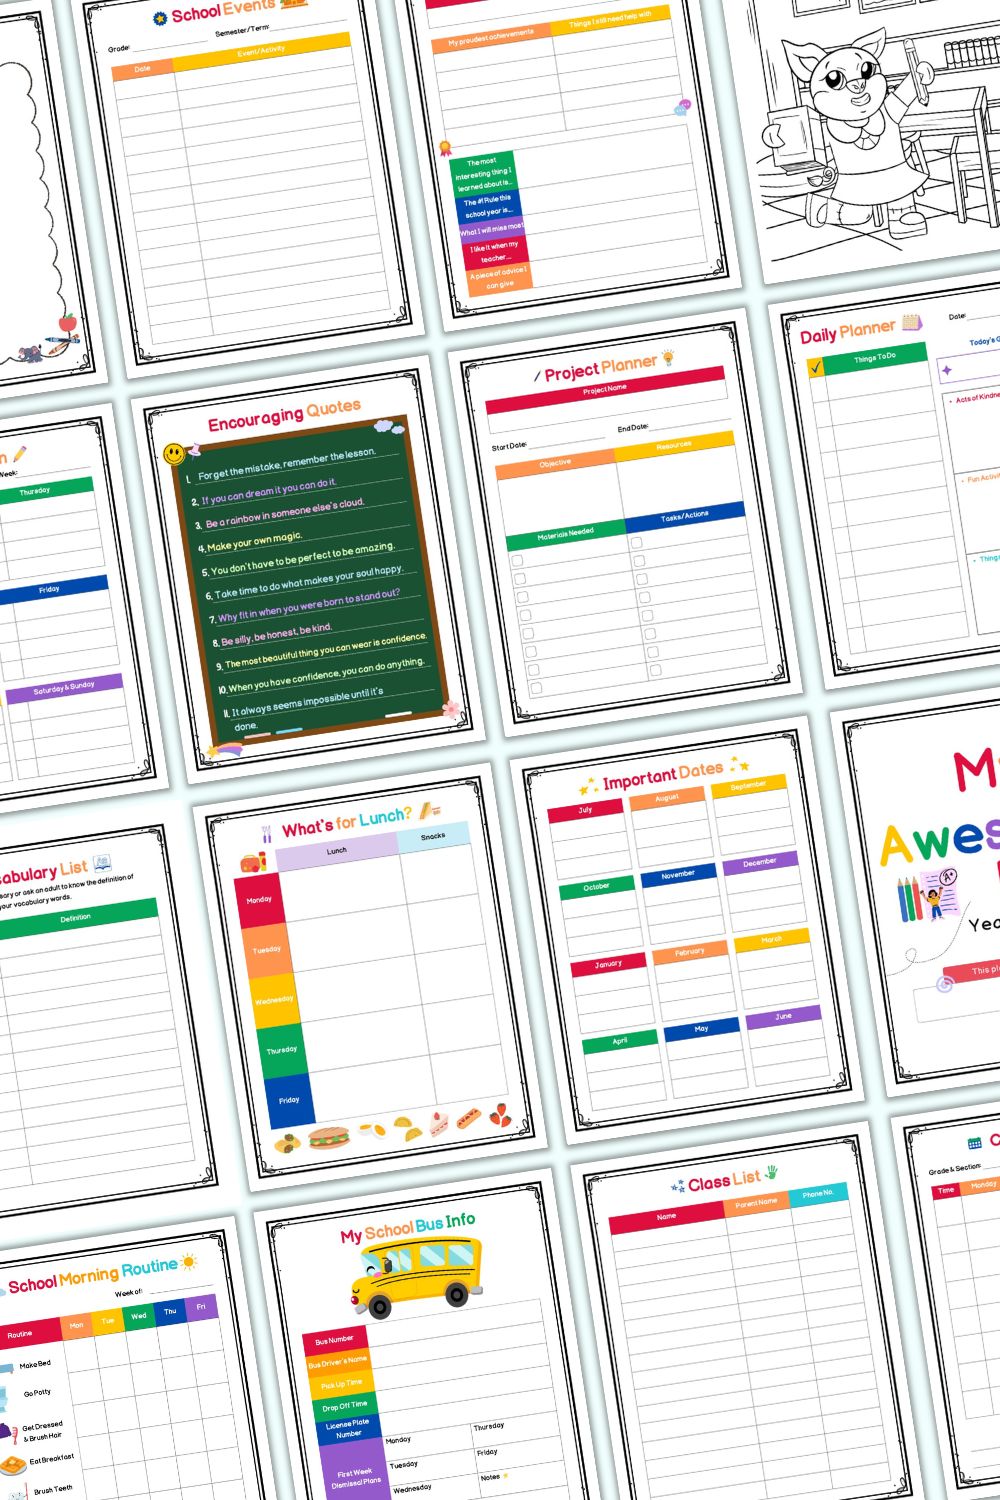 16 interior pages from a school and life planner for elementary students